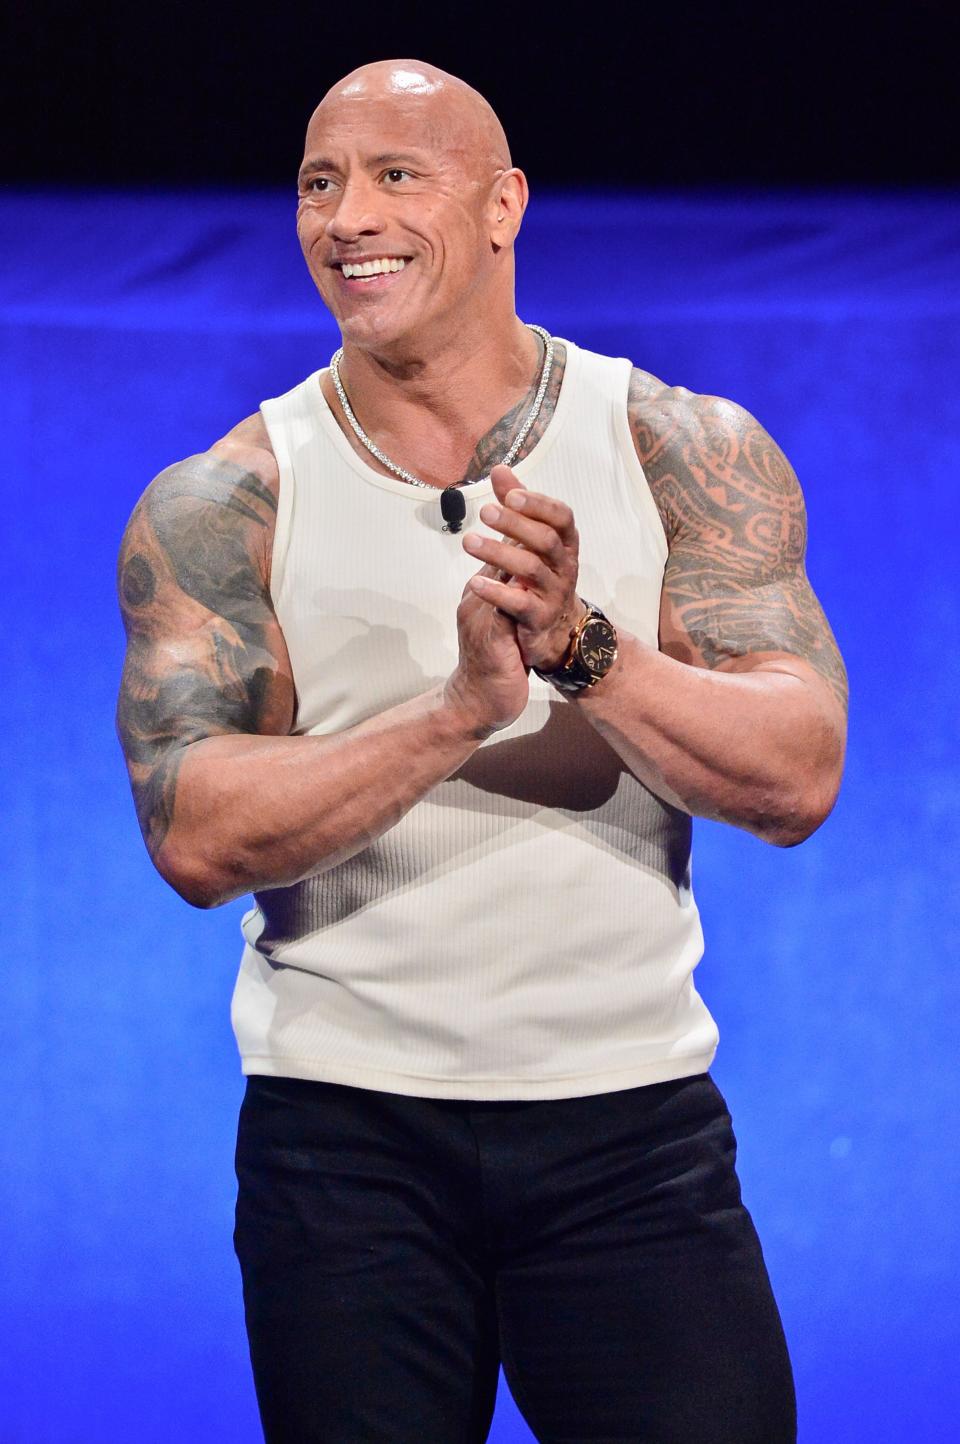 Dwayne Johnson smiles, wearing a white tank top and black pants, showcasing tattoos while clasping hands